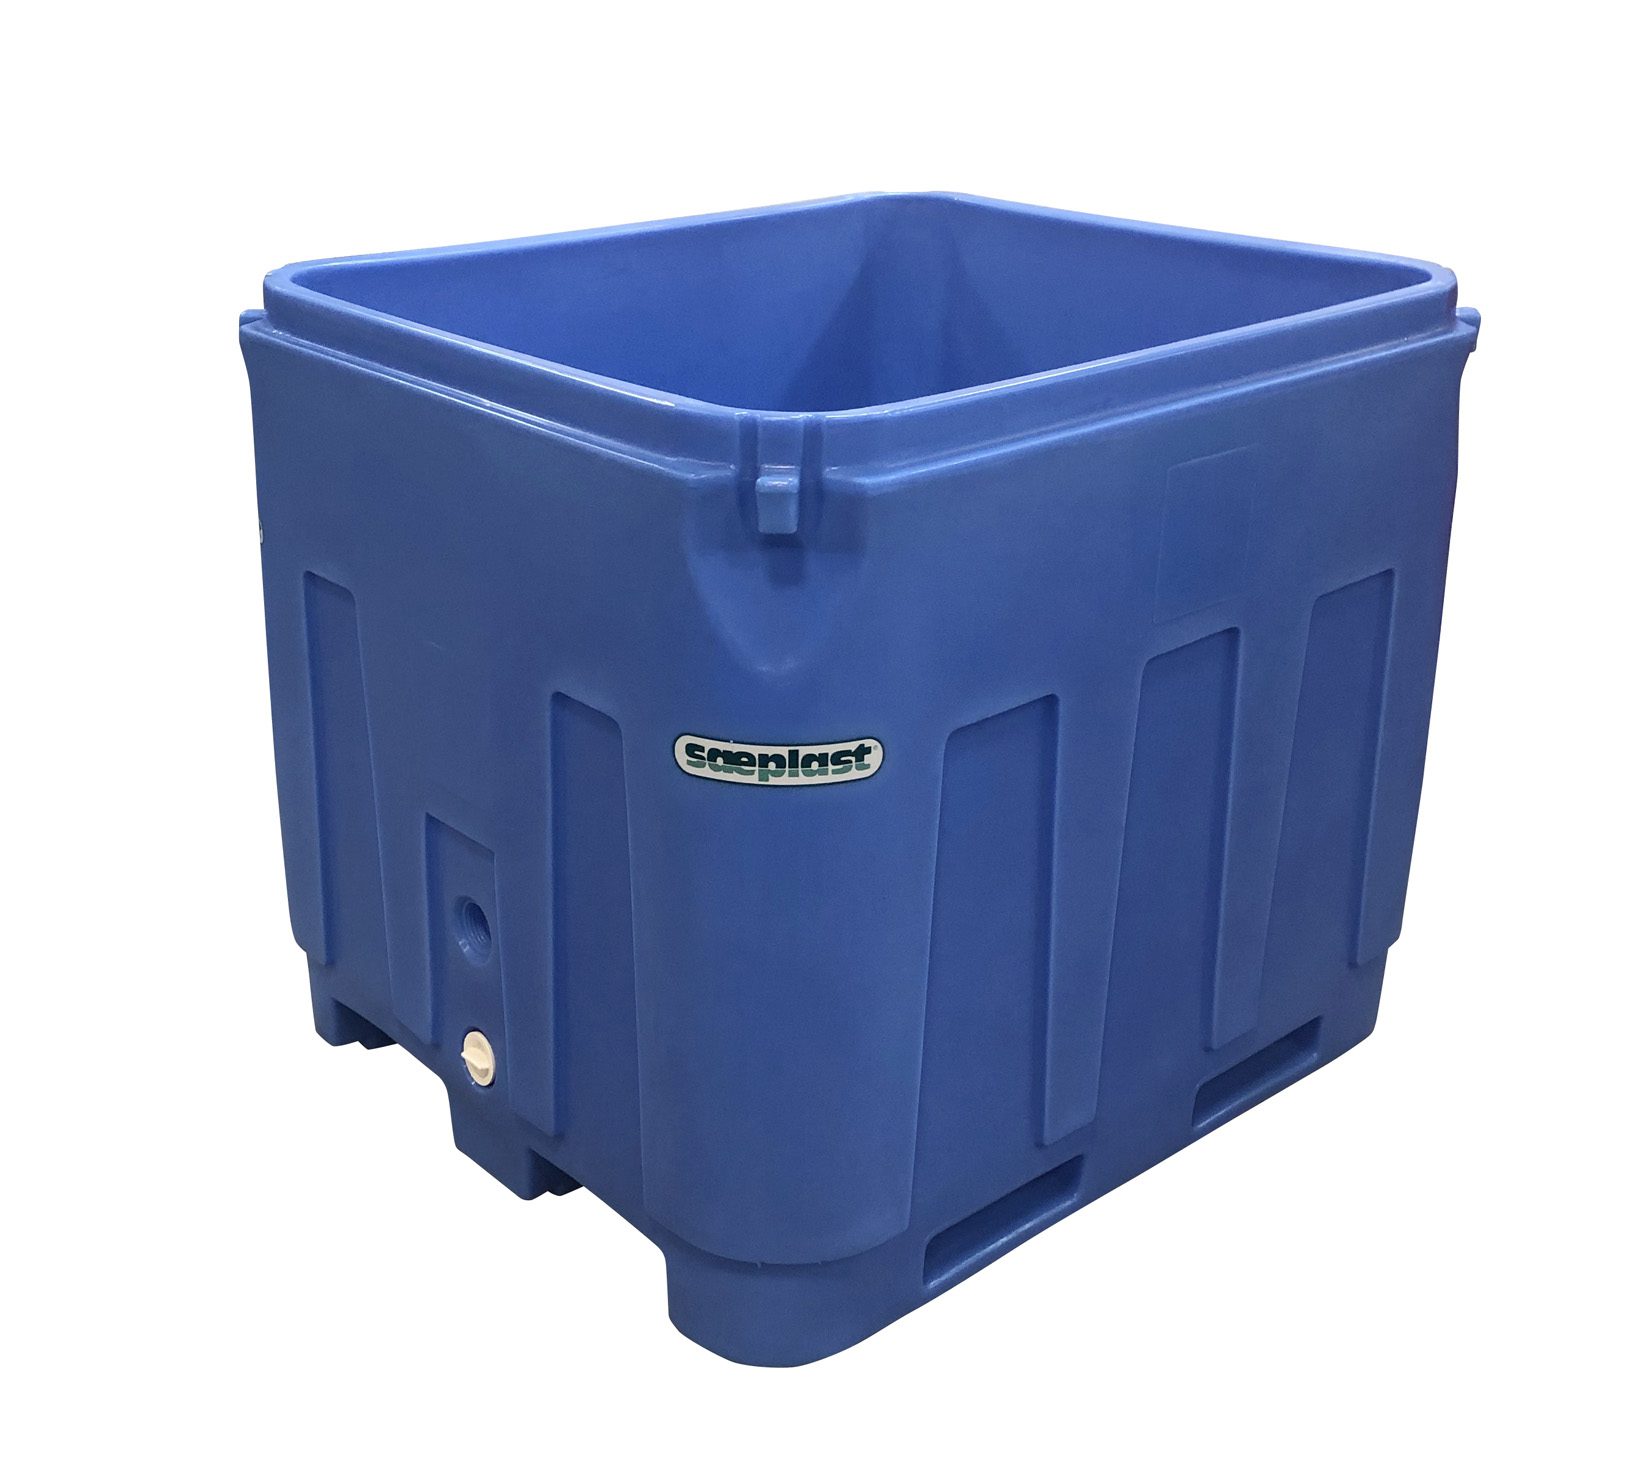 Saeplast D333 Insulated Meat, Fish and Poultry Container